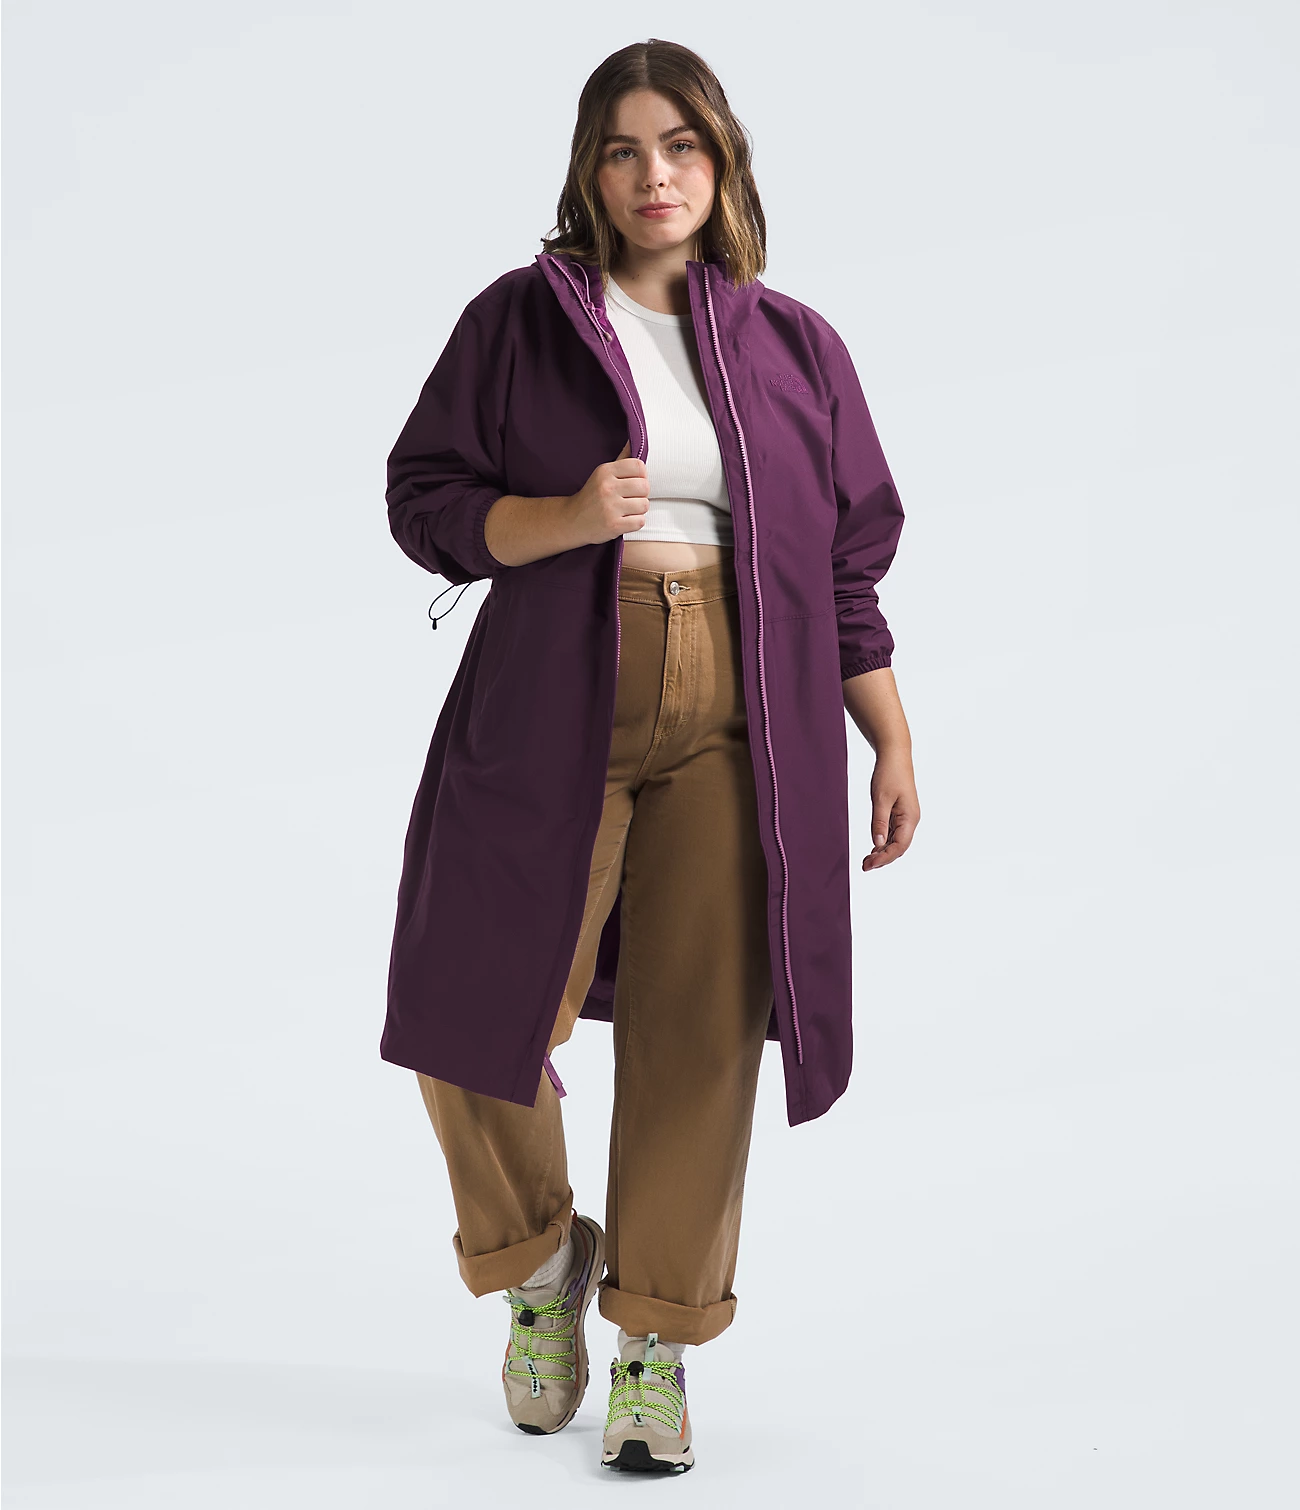 Plus Size Rain Jackets To Keep Your Fits Dry This Spring - 21Ninety